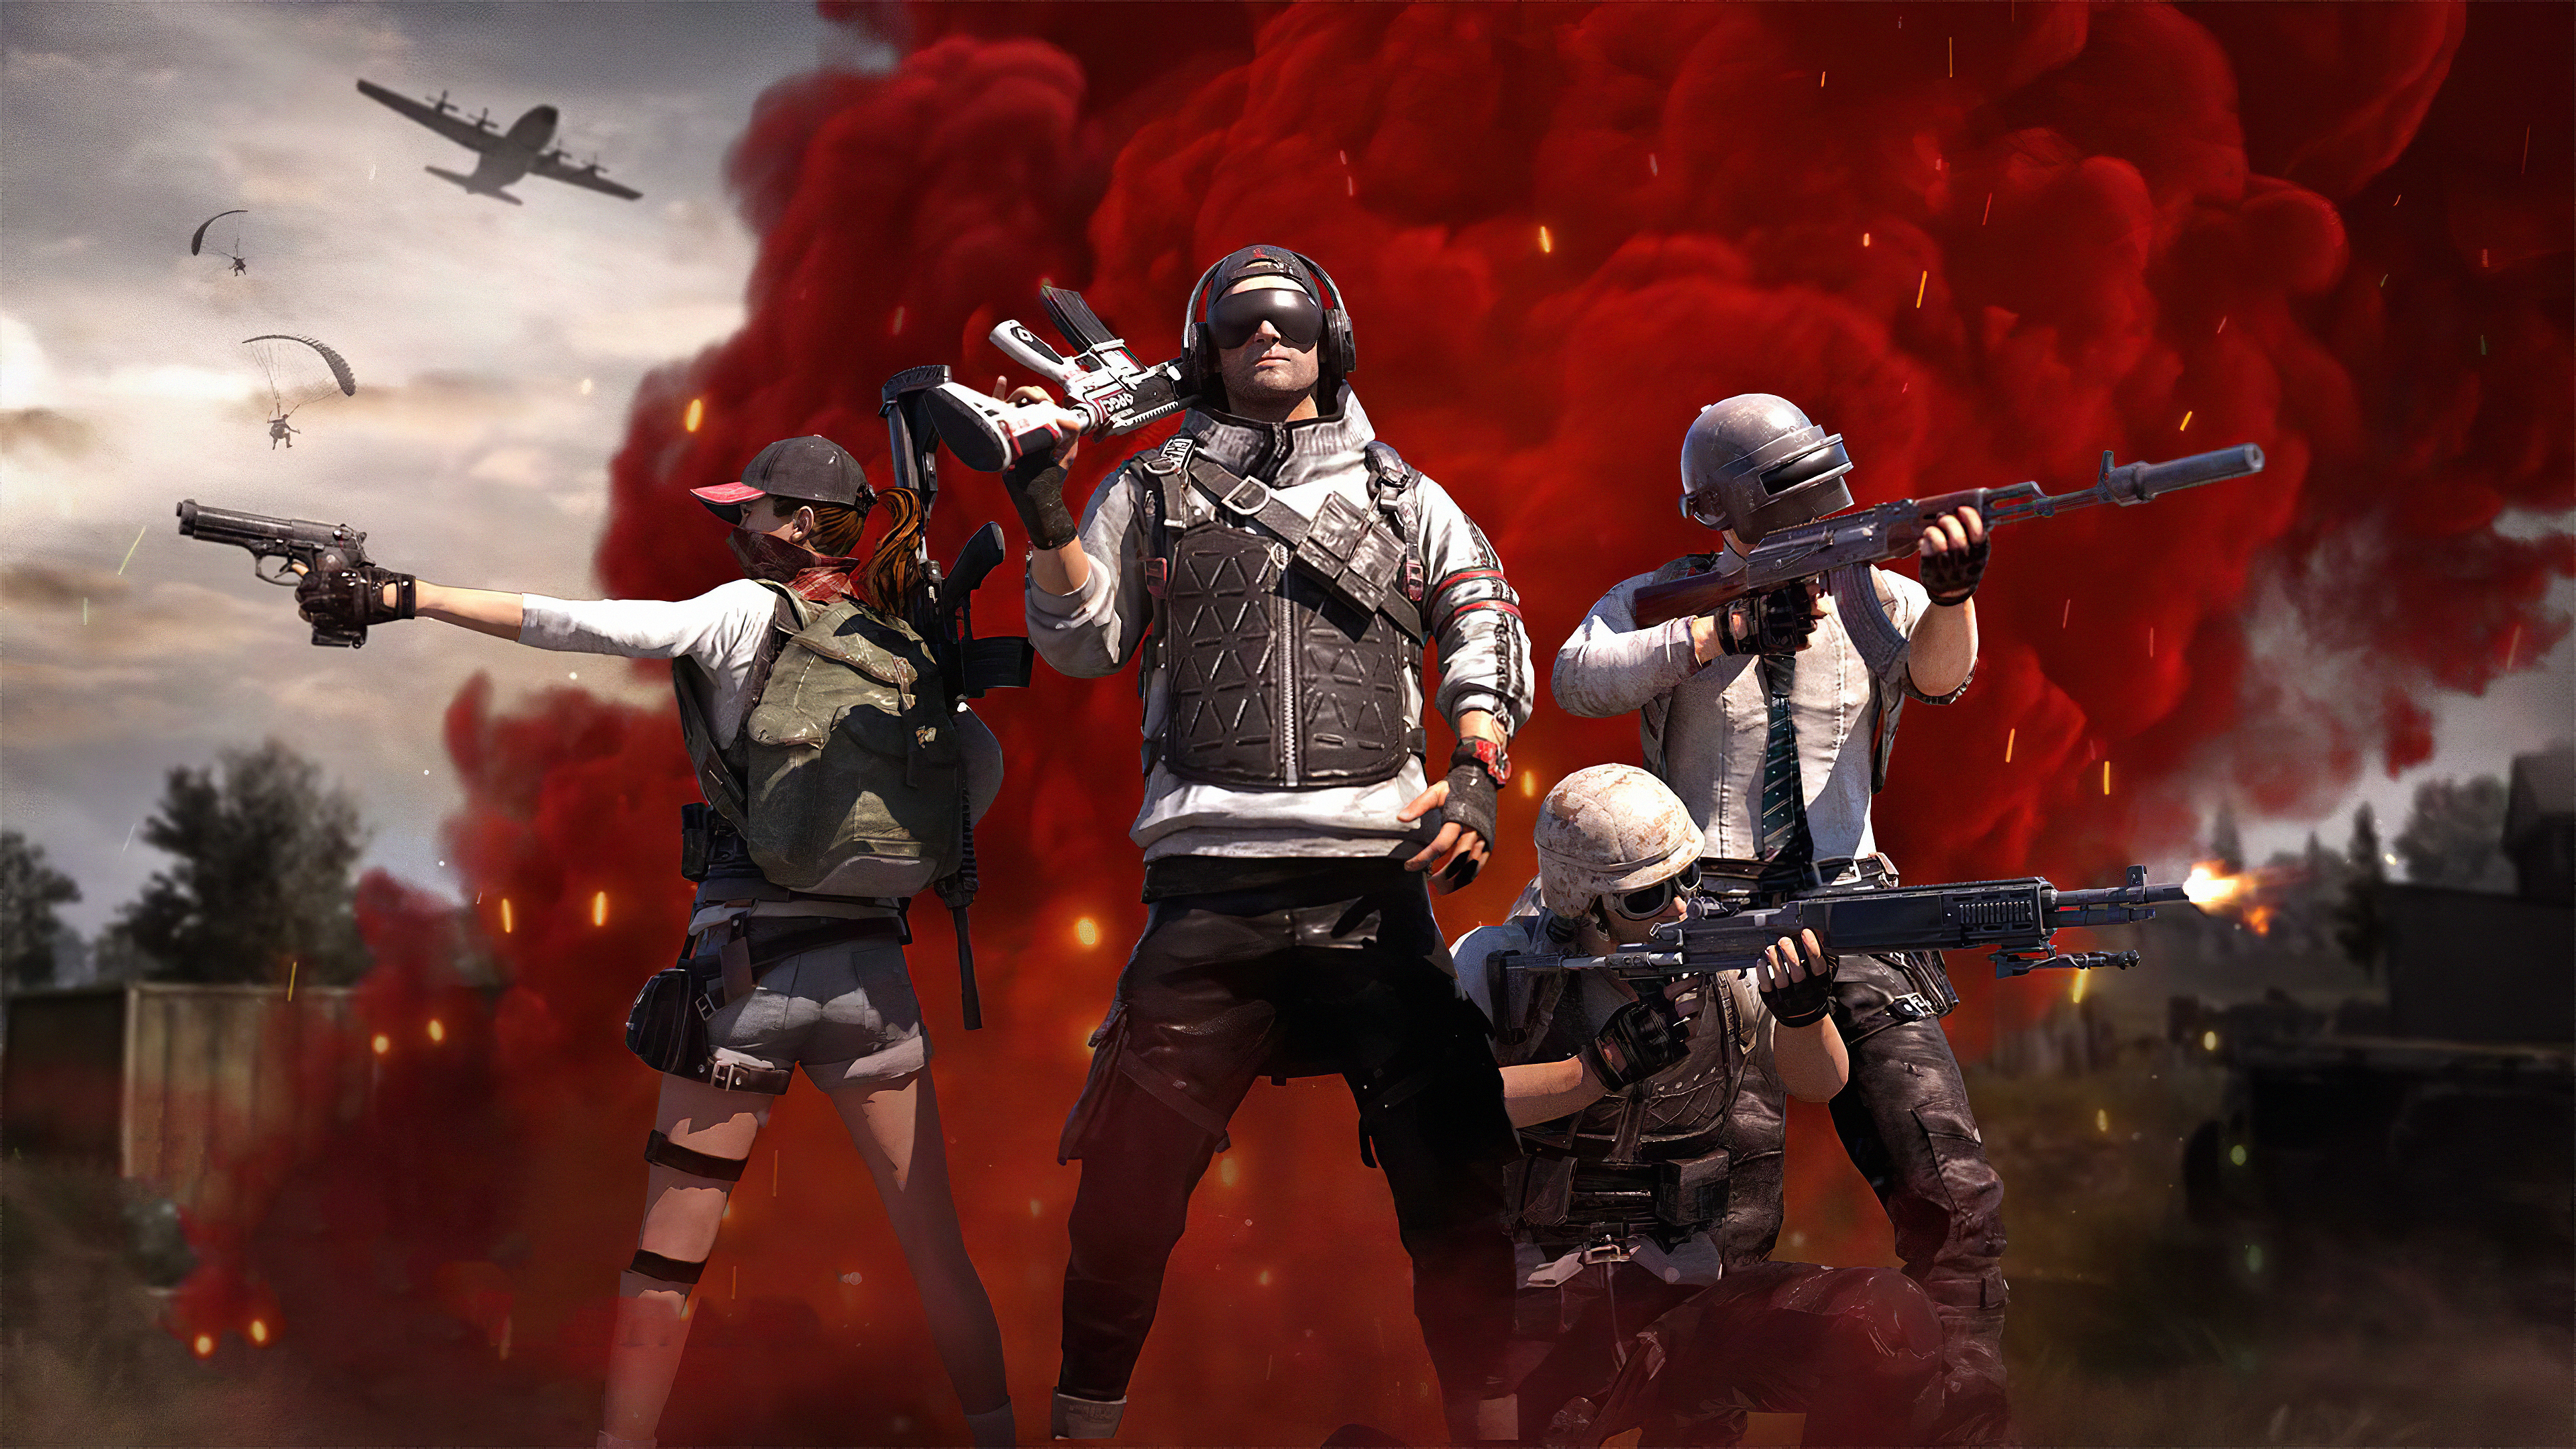 440 PlayerUnknowns Battlegrounds HD Wallpapers and Backgrounds